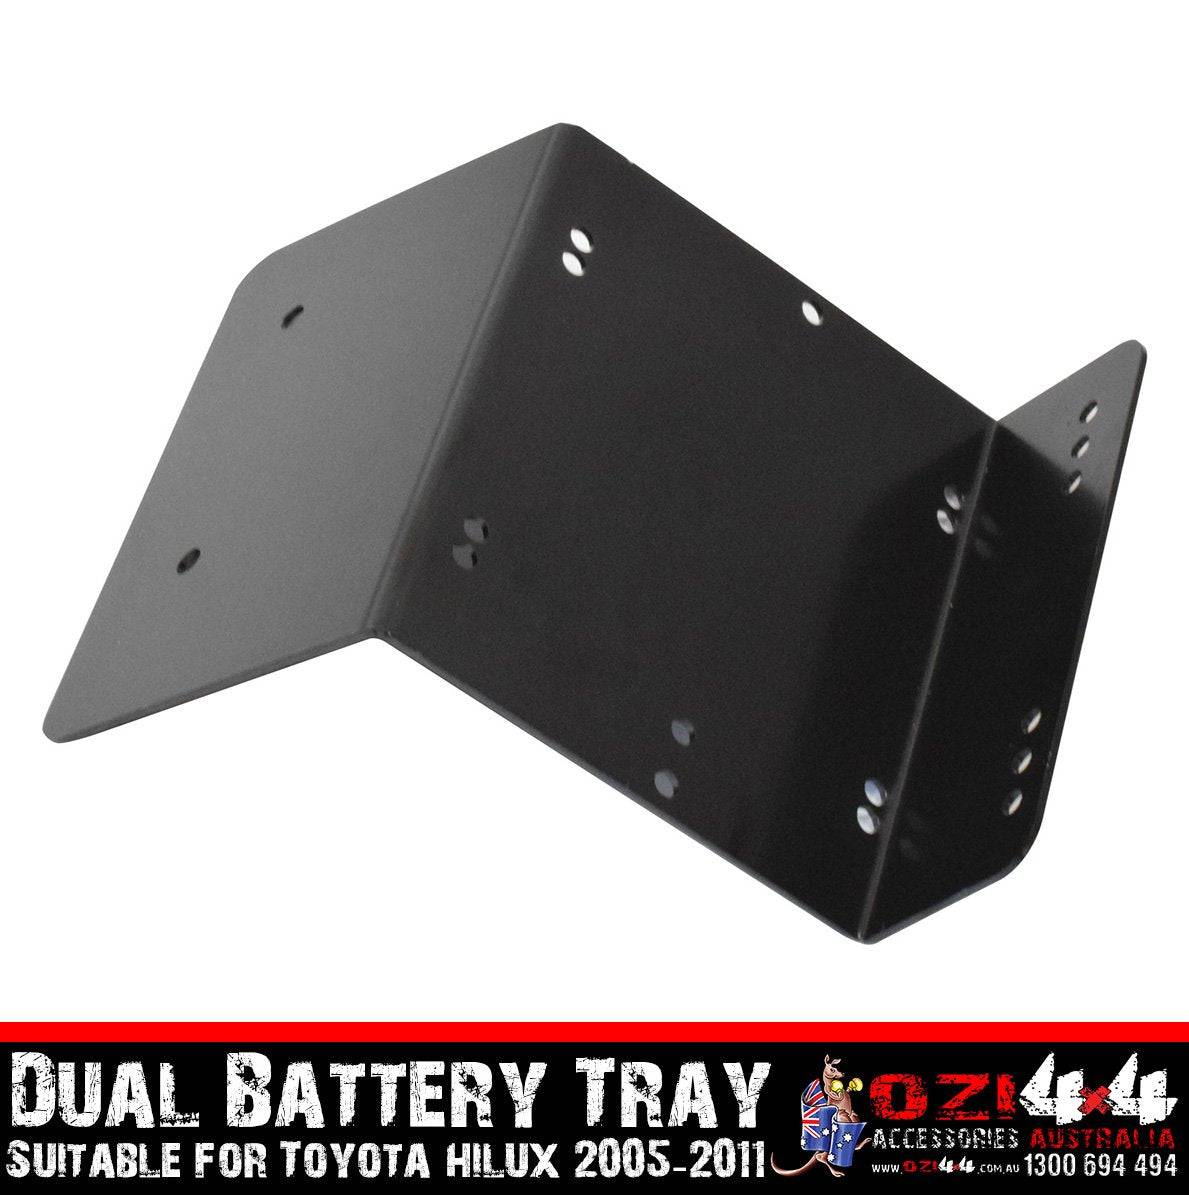 Black Dual Battery Tray Suits Toyota Hilux 2005-2011 (Online Only)